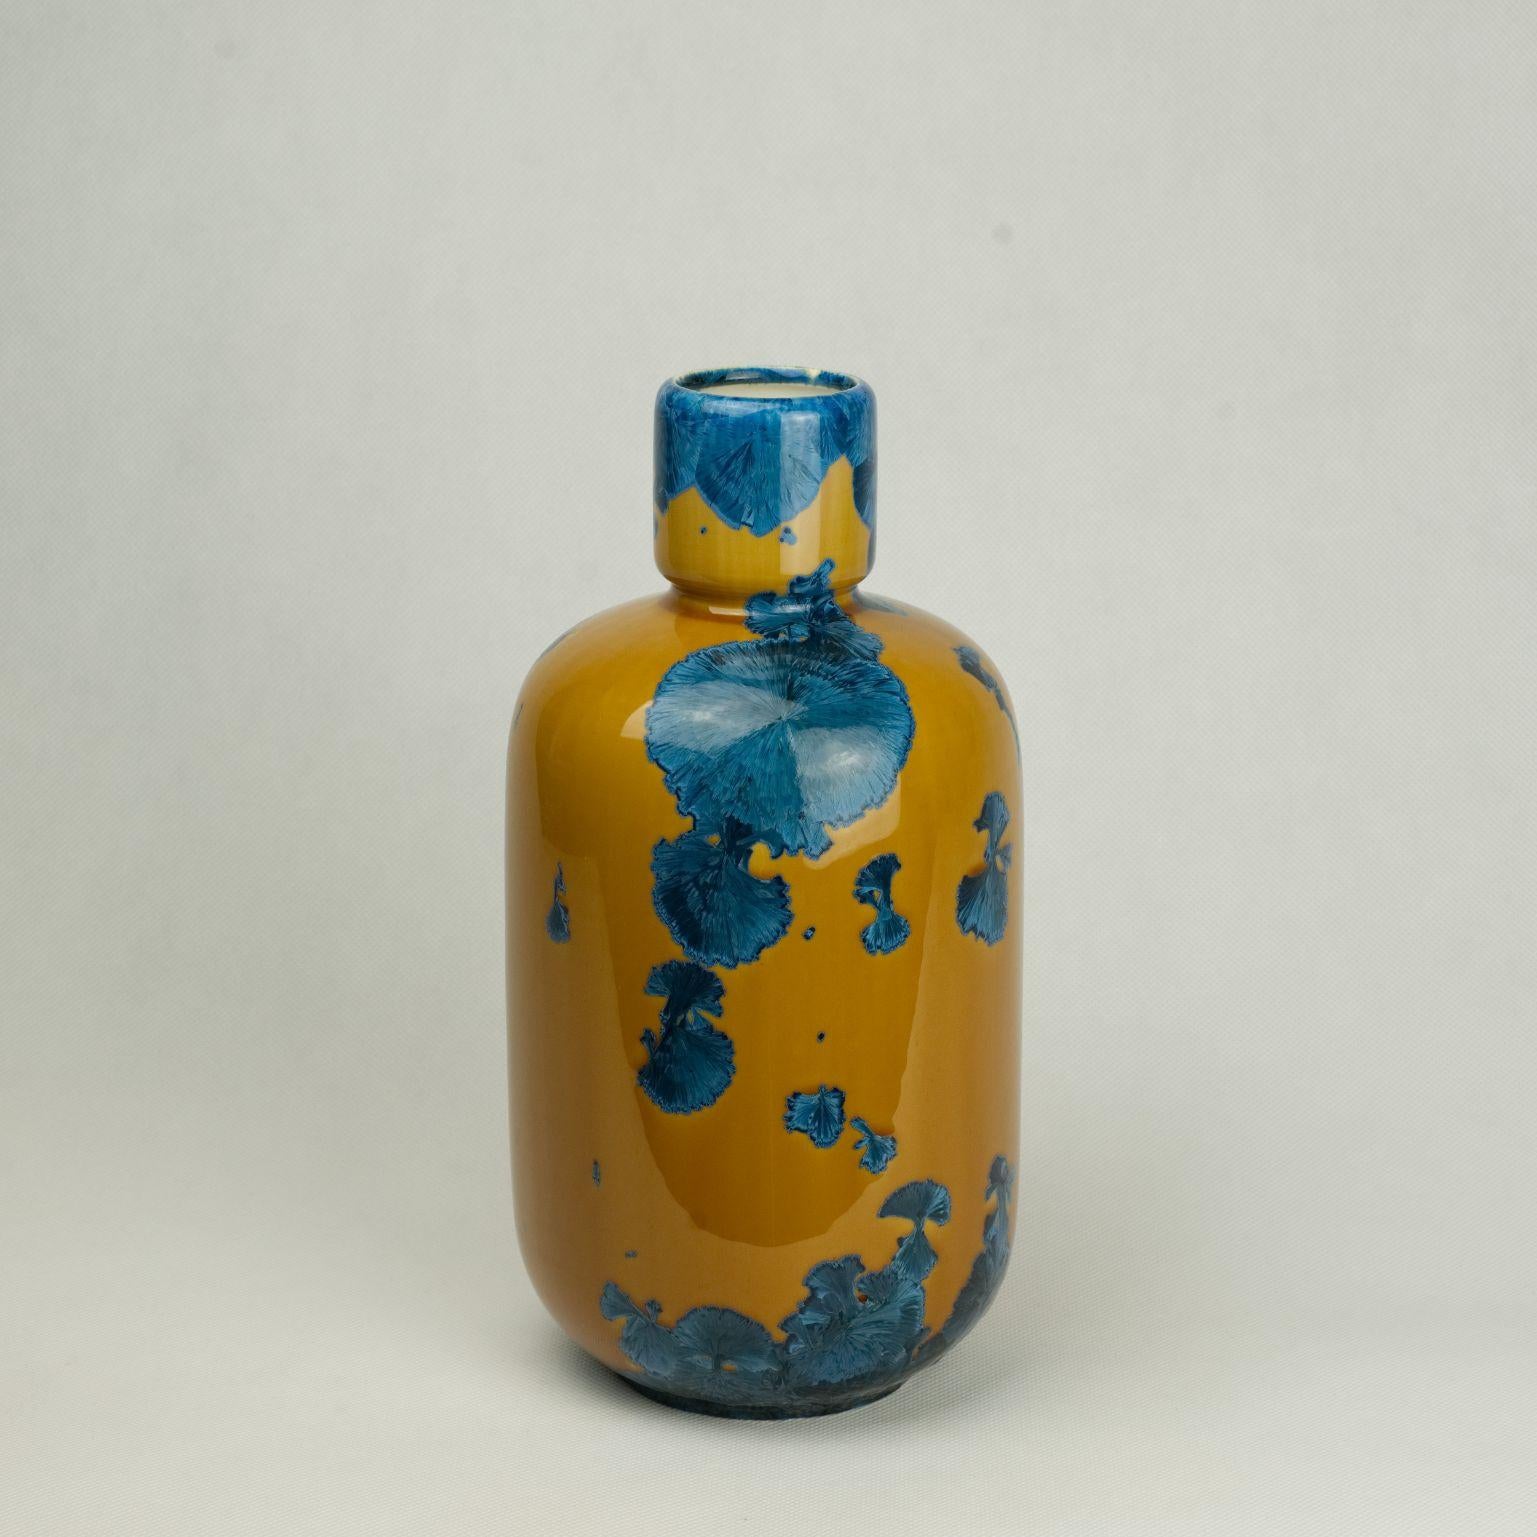 Bottle by Milan Pekar
Dimensions: D x H 26 cm
Materials: Glaze, porcelain

Hand-made in the Czech Republic. 

Also available: different colors and patterns

Established own studio August 2009 – Focus mainly on porcelain, developing own